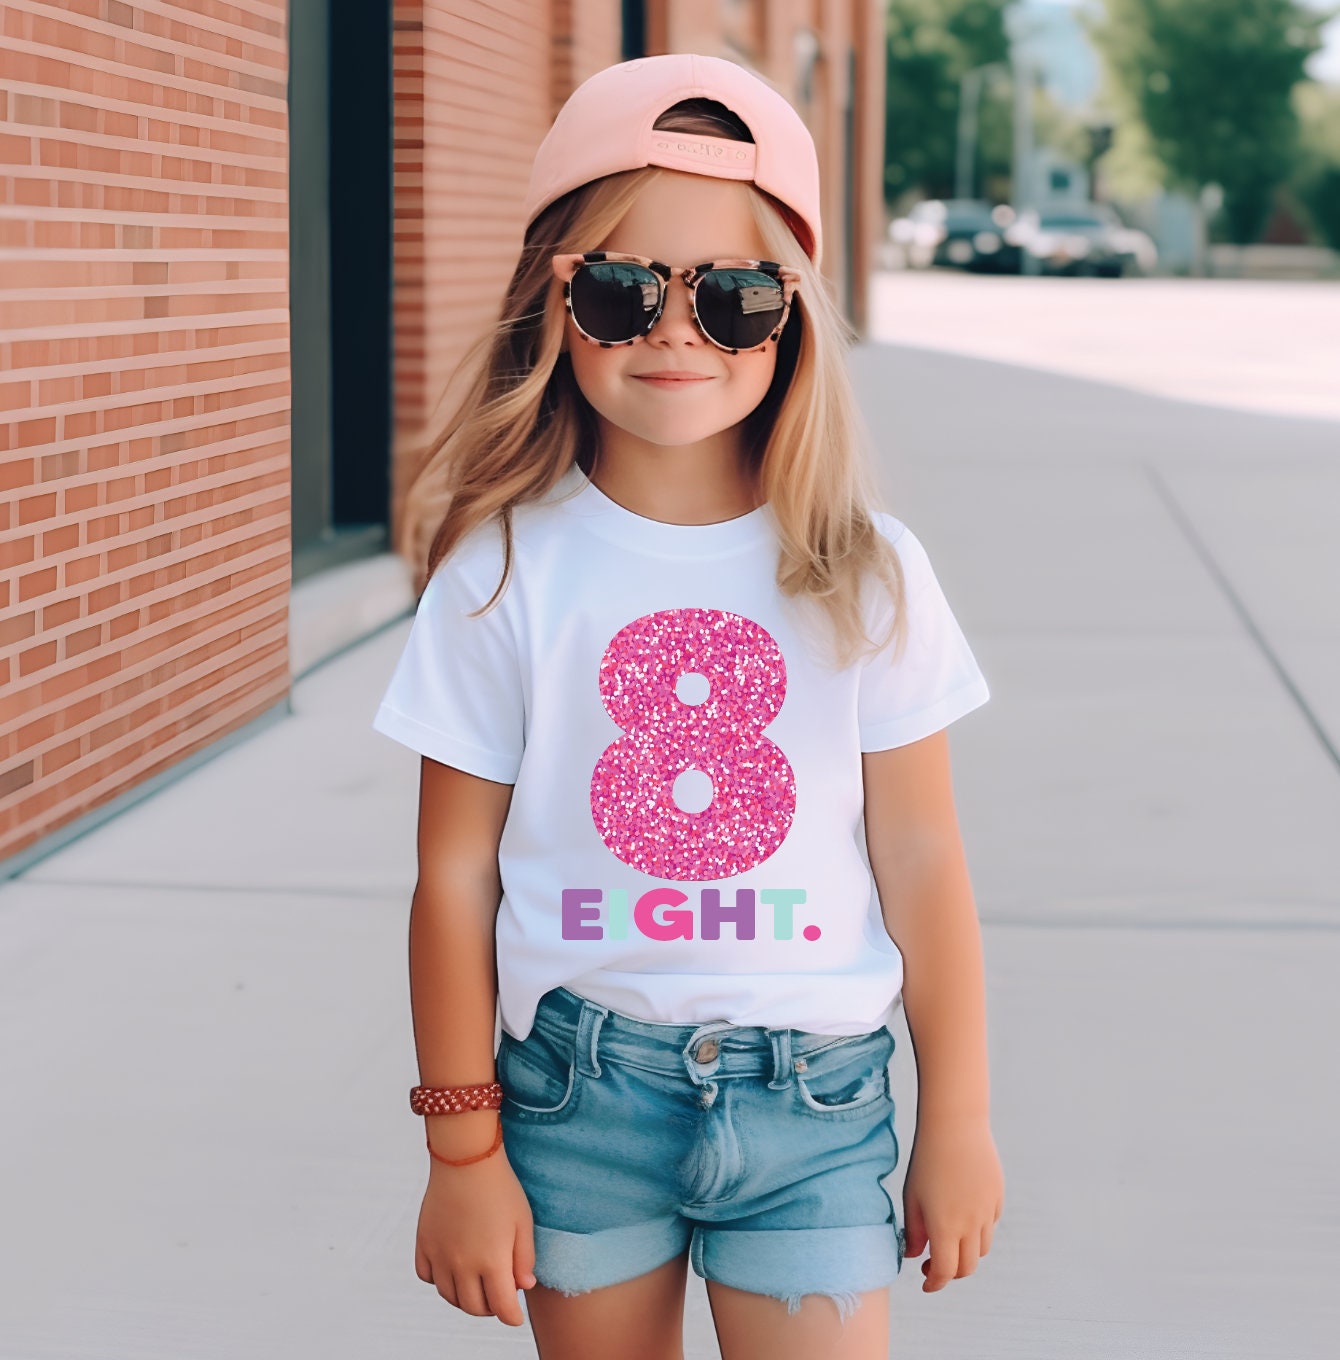 Kids Christmas Gift T-shirt 8 Year Old Girl, This is What an Awesome Looks  Like Girls Birthday Organic Cotton 